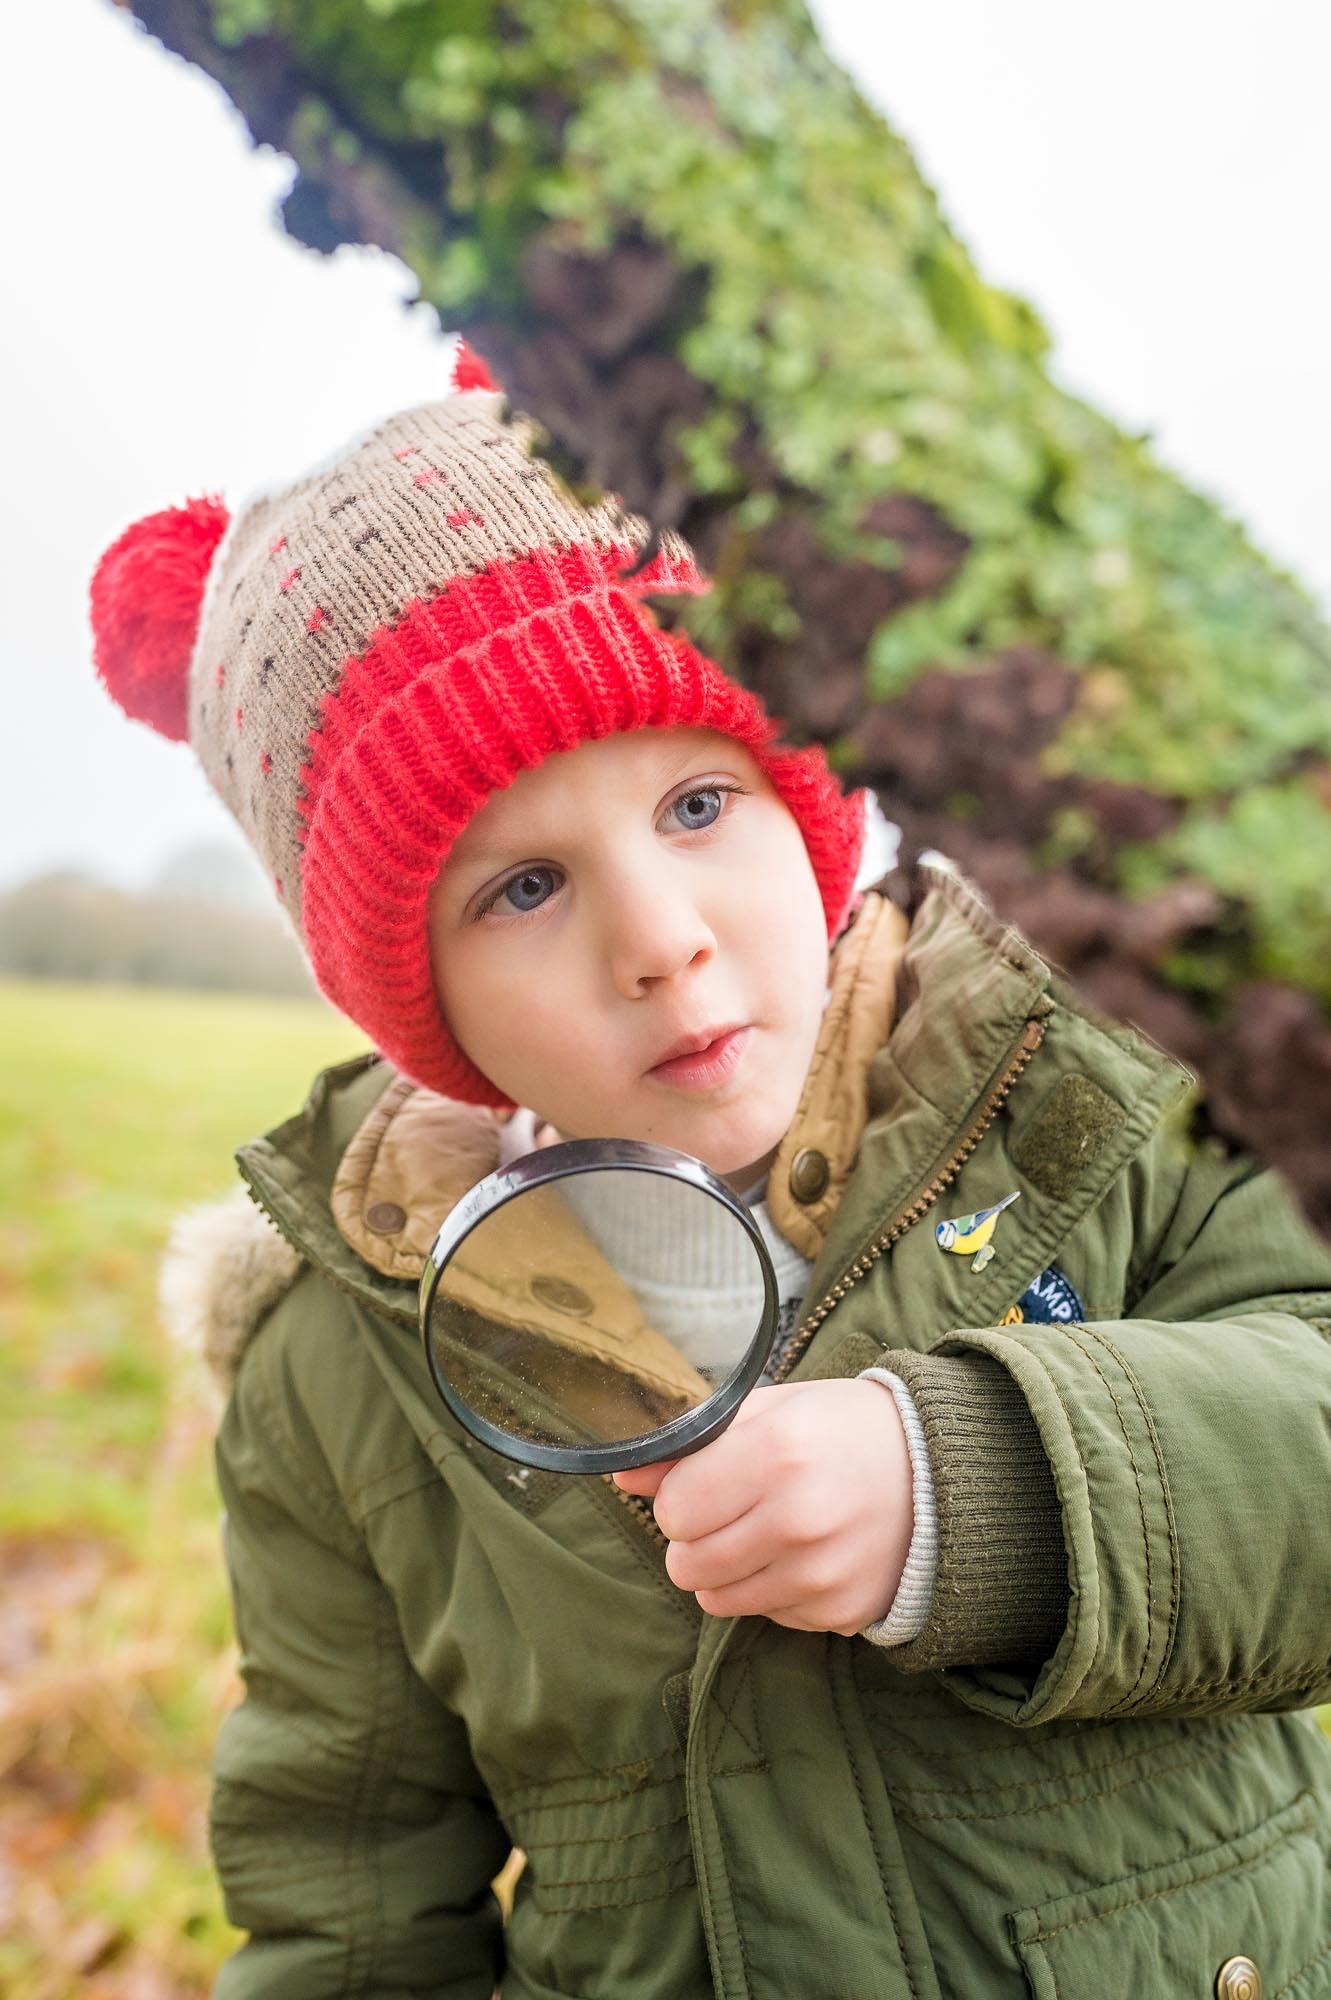 Little boy in bobble hat looking closely at branch holding magnifying glass